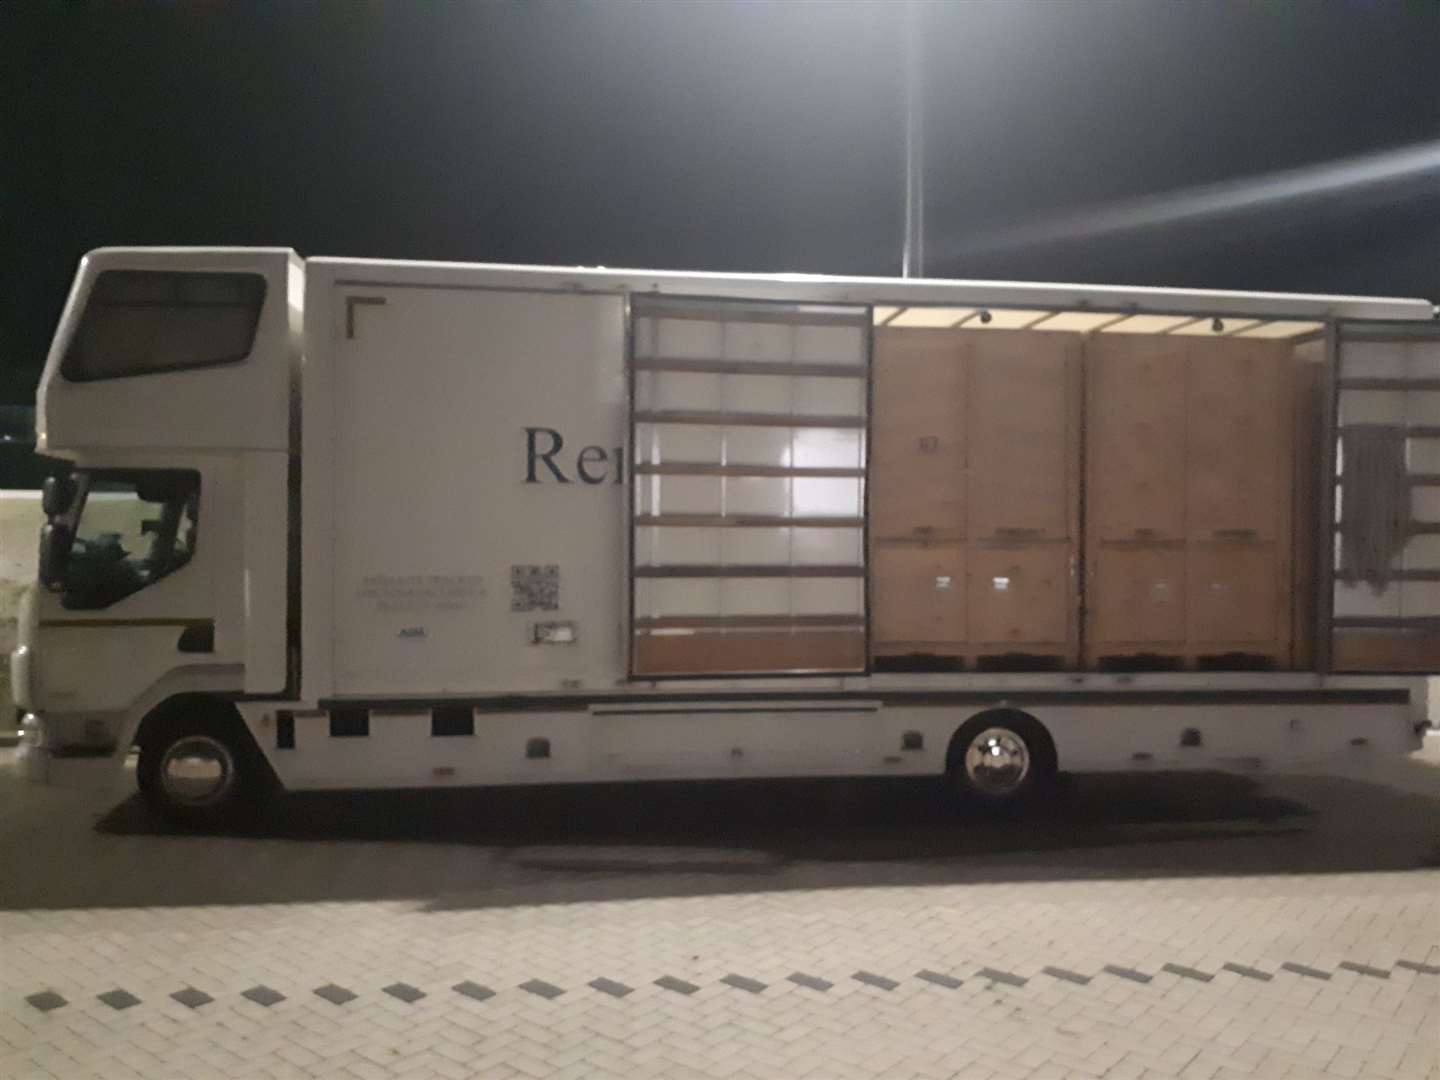 The removals truck used by Wright on the trip to the Netherlands where he was arrested. Picture: NCA